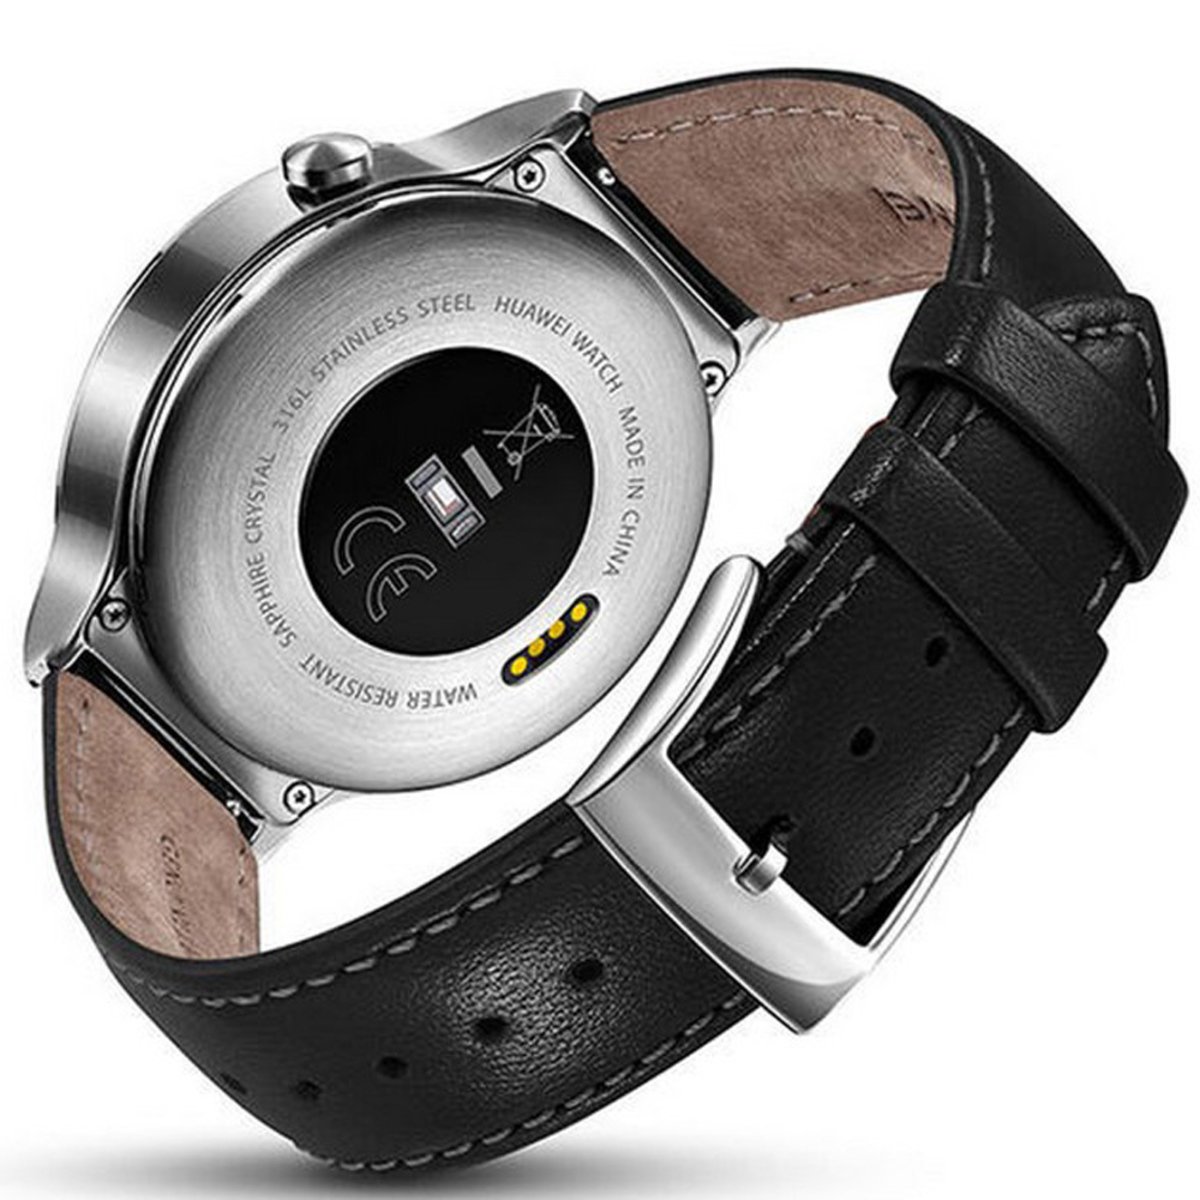 Huawei Smart Watch with Black Leather Strap